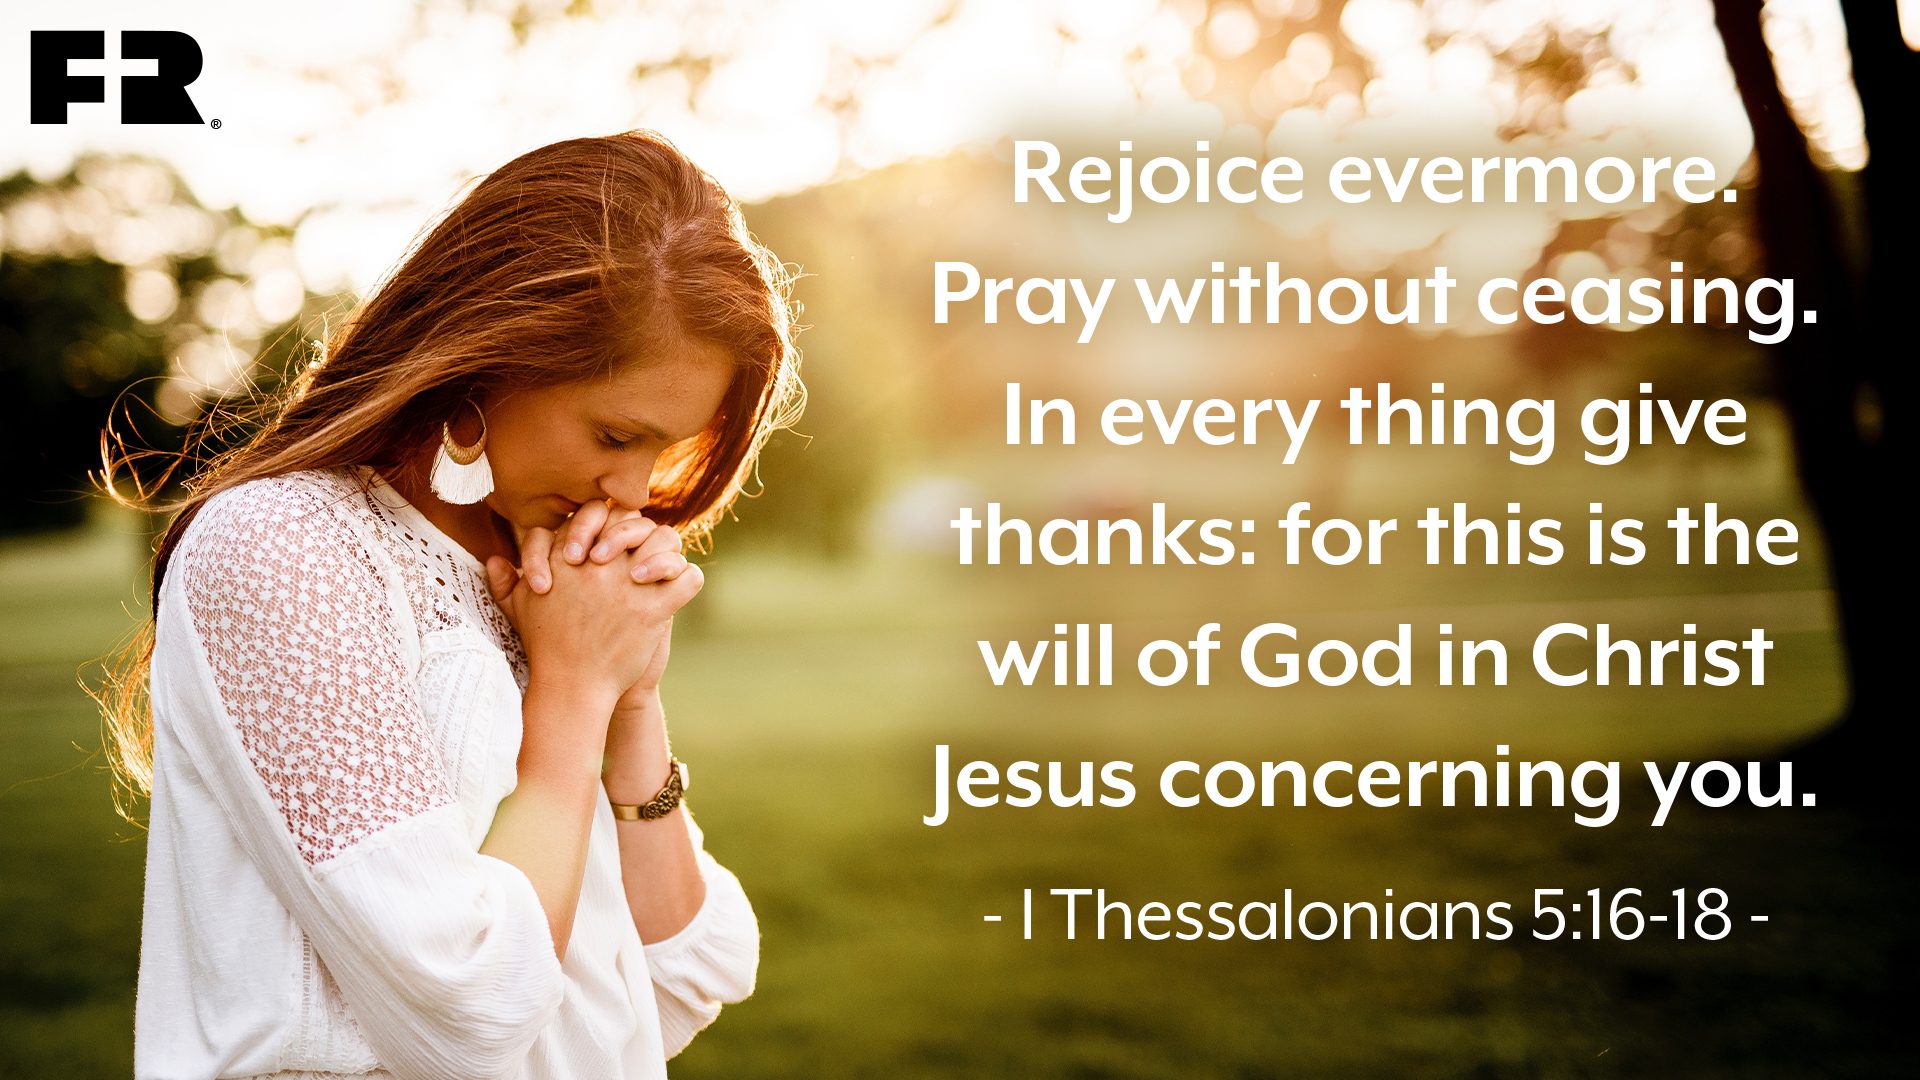 “Rejoice evermore. Pray without ceasing. In every thing give thanks: for this is the will of God in Christ Jesus concerning you.”